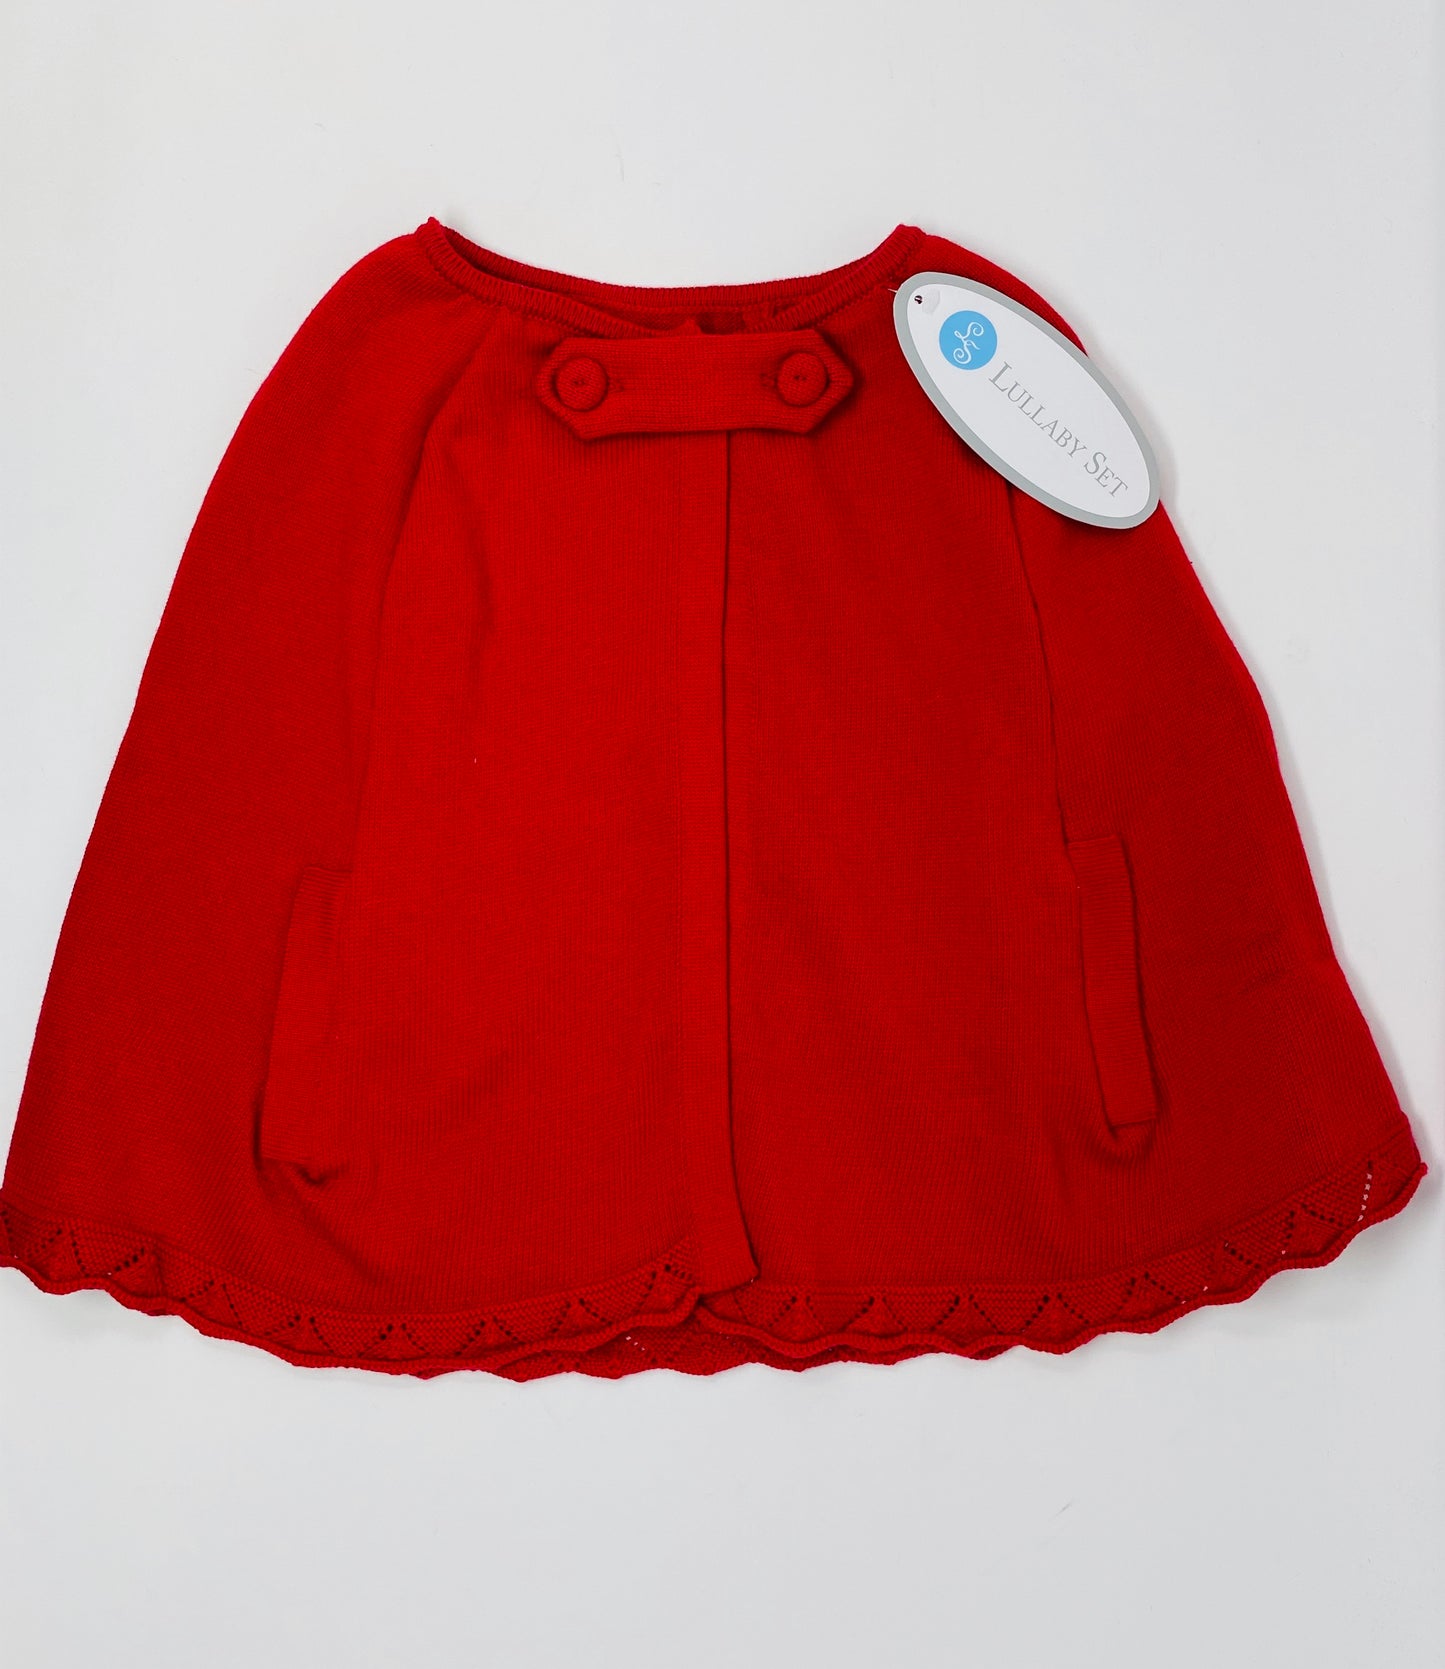 City Life Royal Sweater Cape - Red Clothing Lullaby Set   